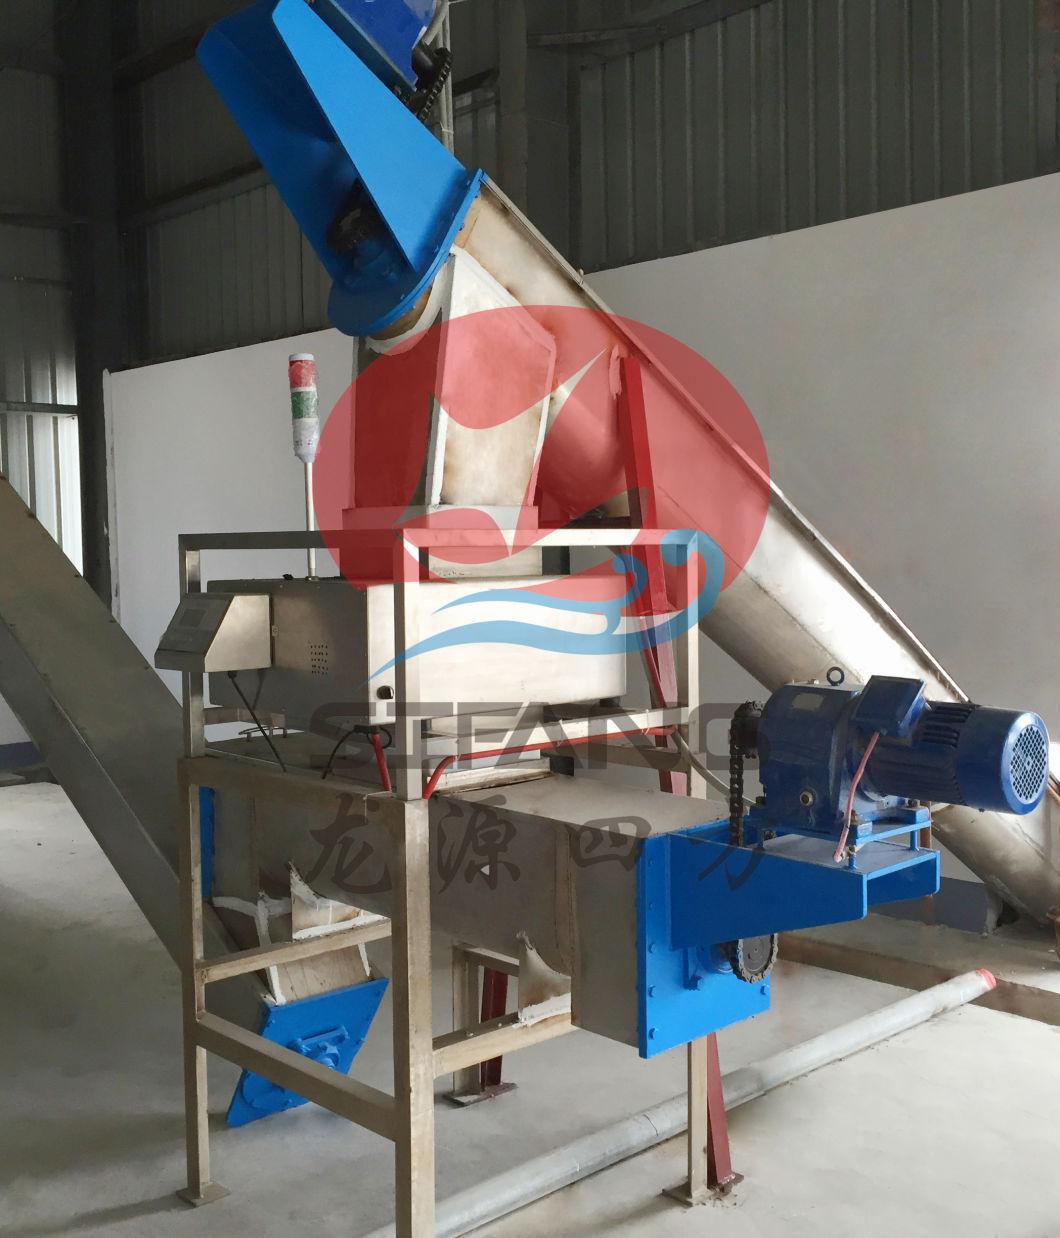 Fish Meal Machine/Fish Meal Treatment Plant/Fish Meal Making Machine